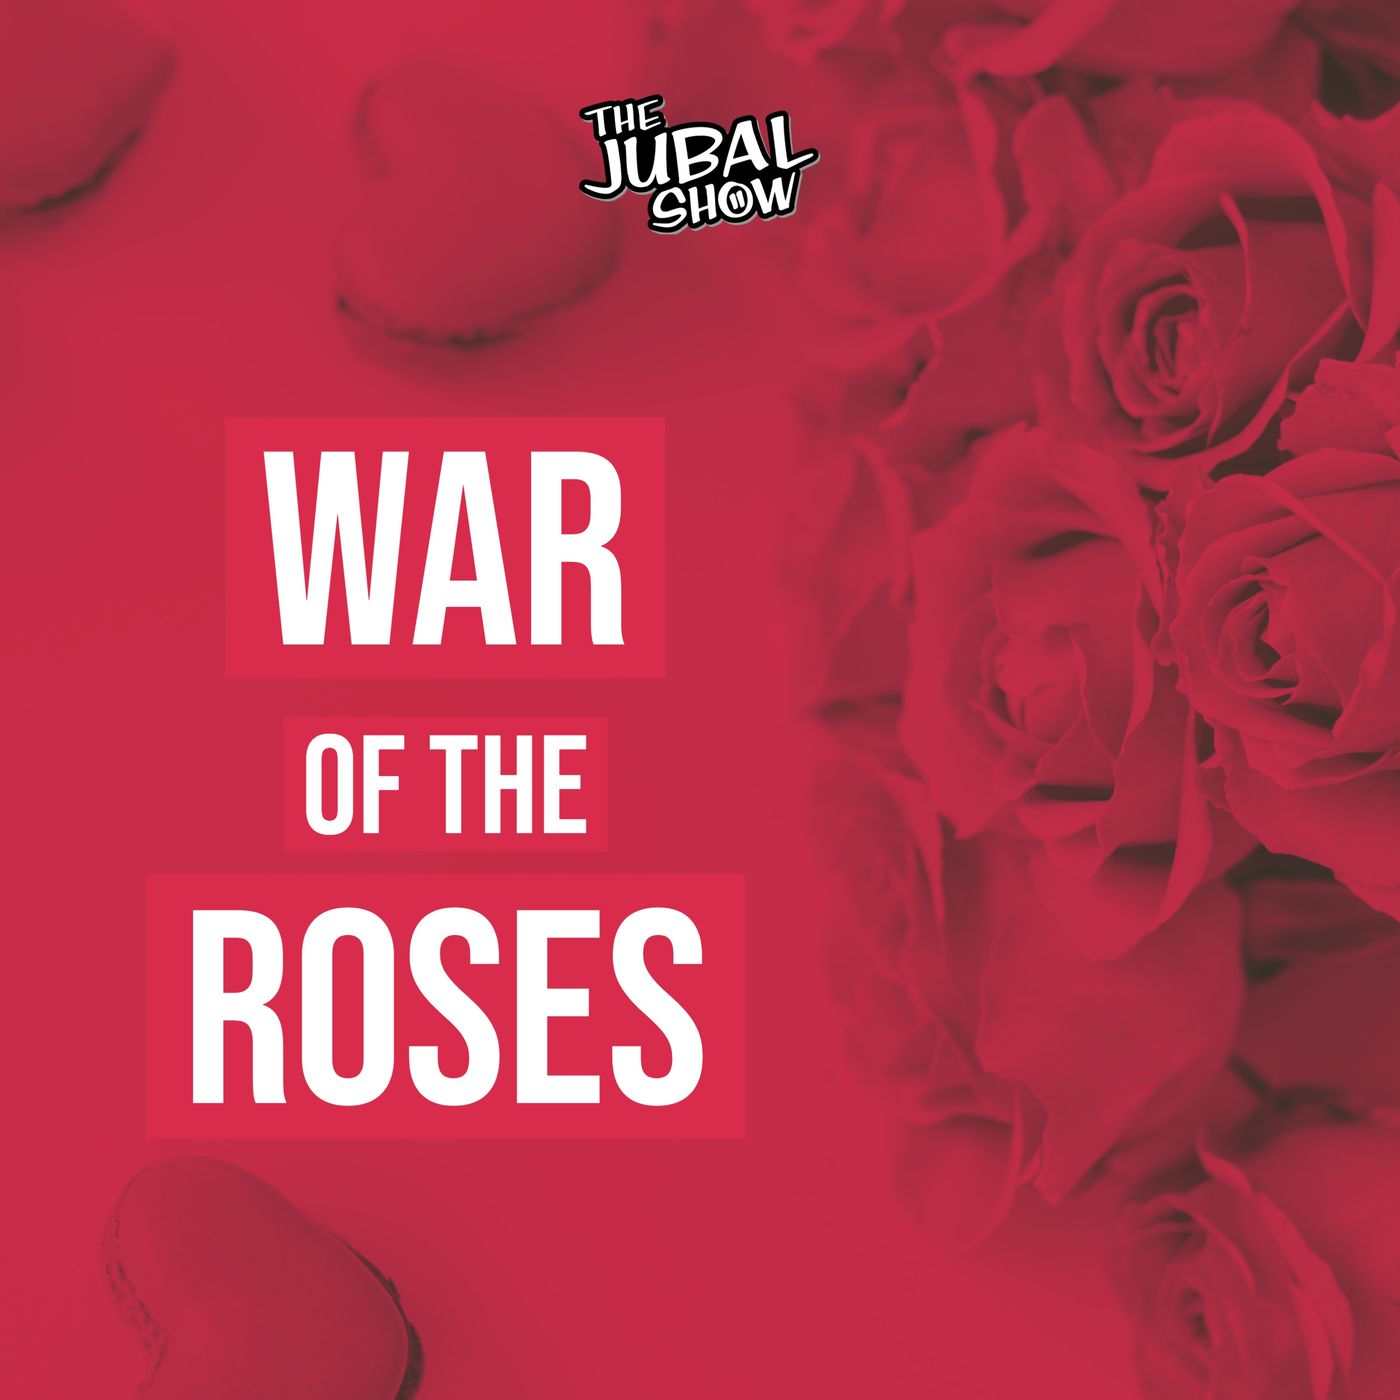 Faith KNOWS her husband is cheating in this War Of The Roses!